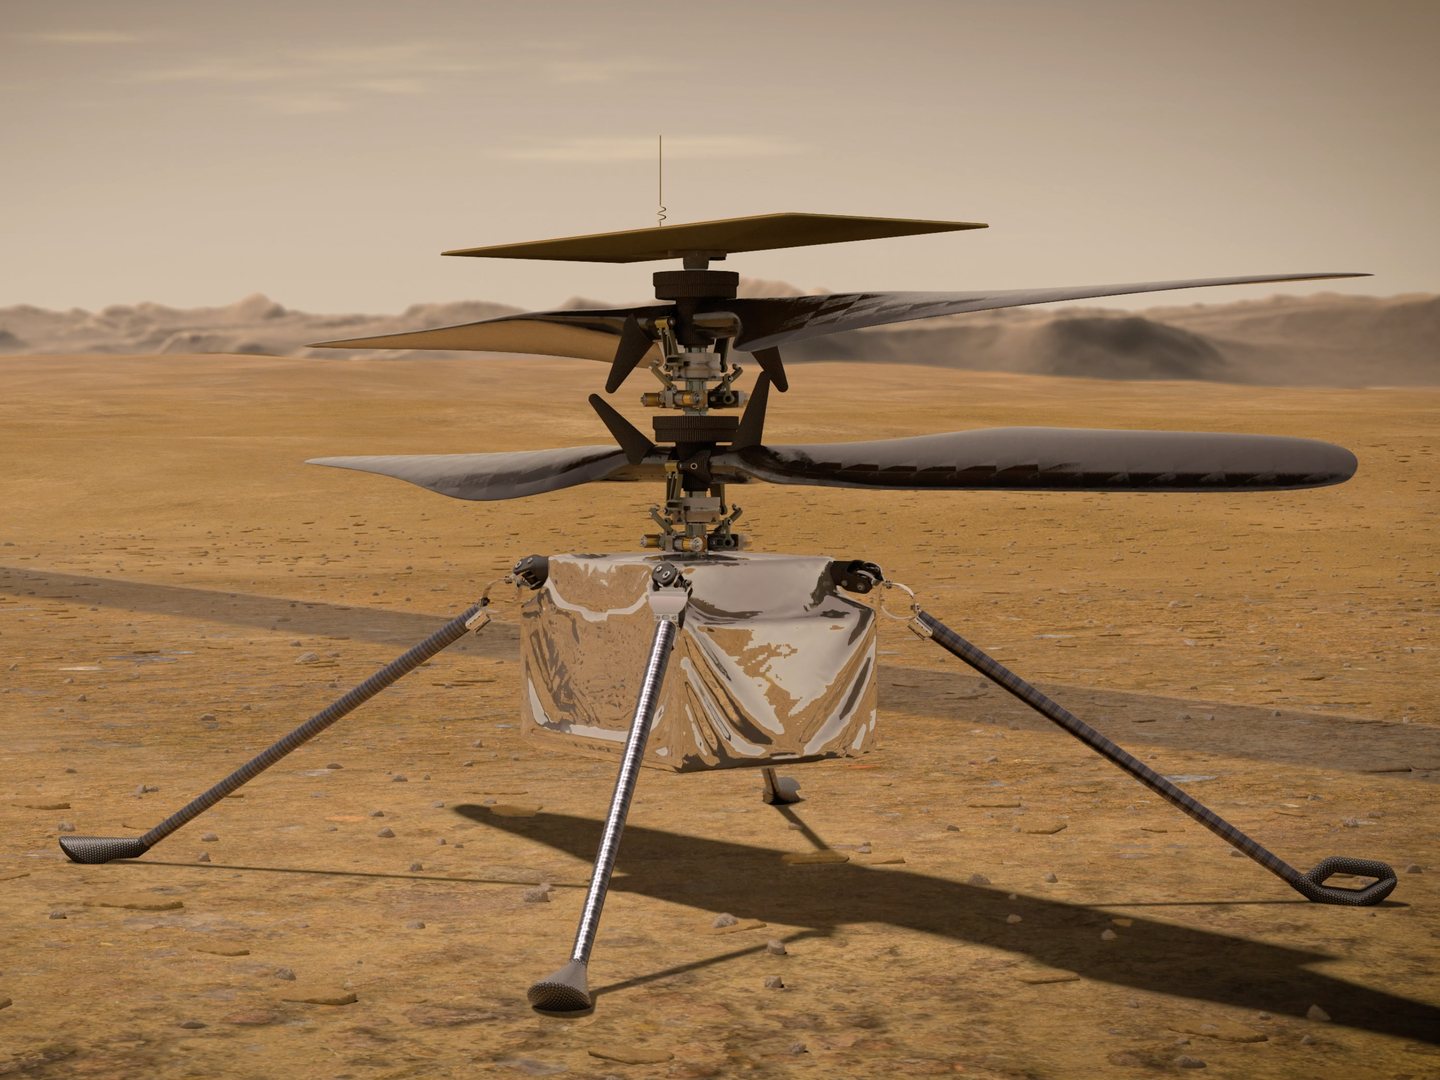 An artist's impression of the Ingenuity helicopter on the surface of Mars.